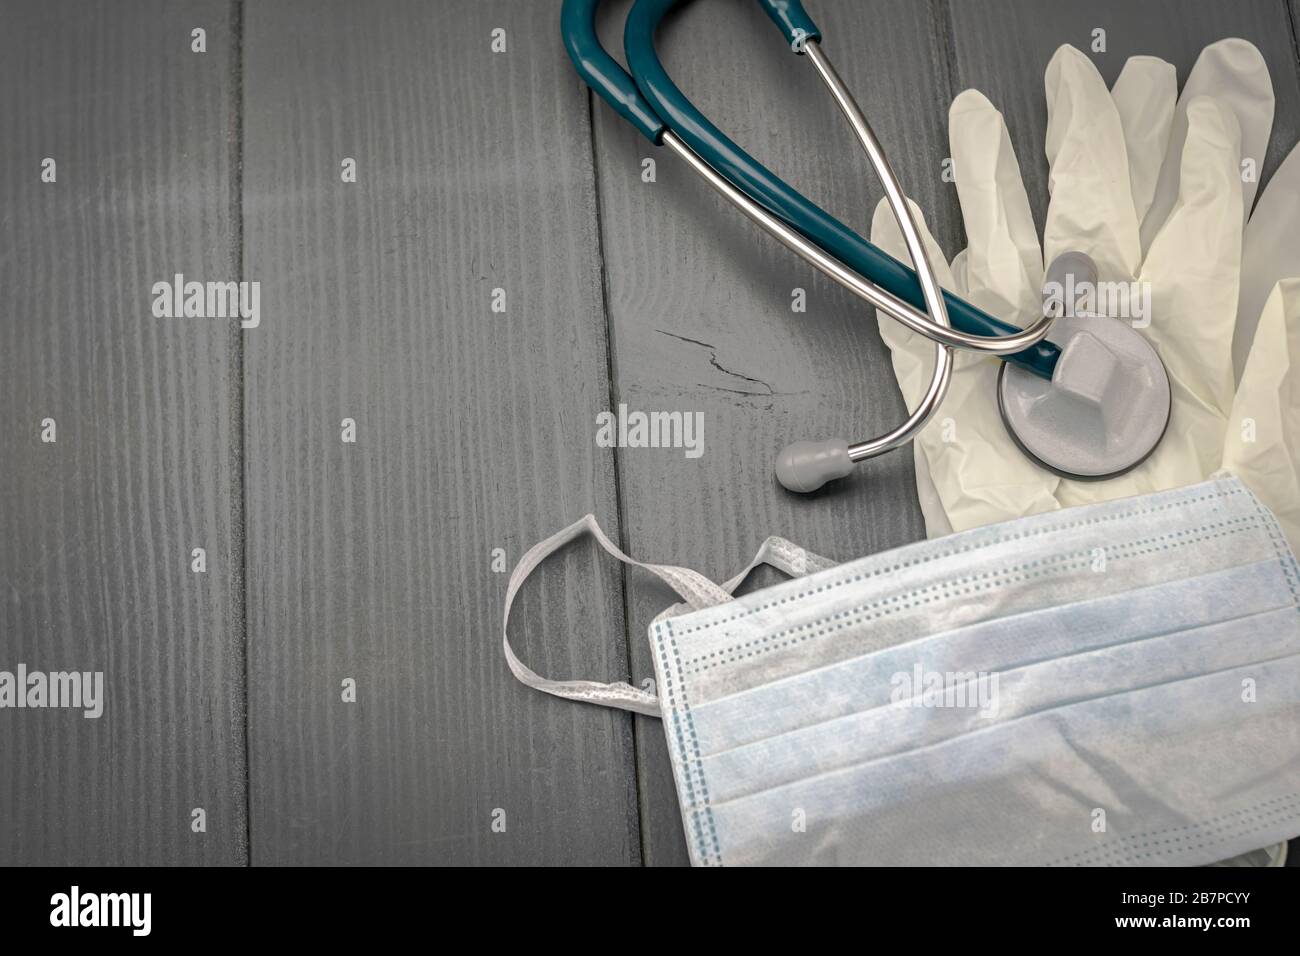 Individual protection equipment. Latex gloves, mask and stethoscope for medical use to detect viruses and bacteria Stock Photo